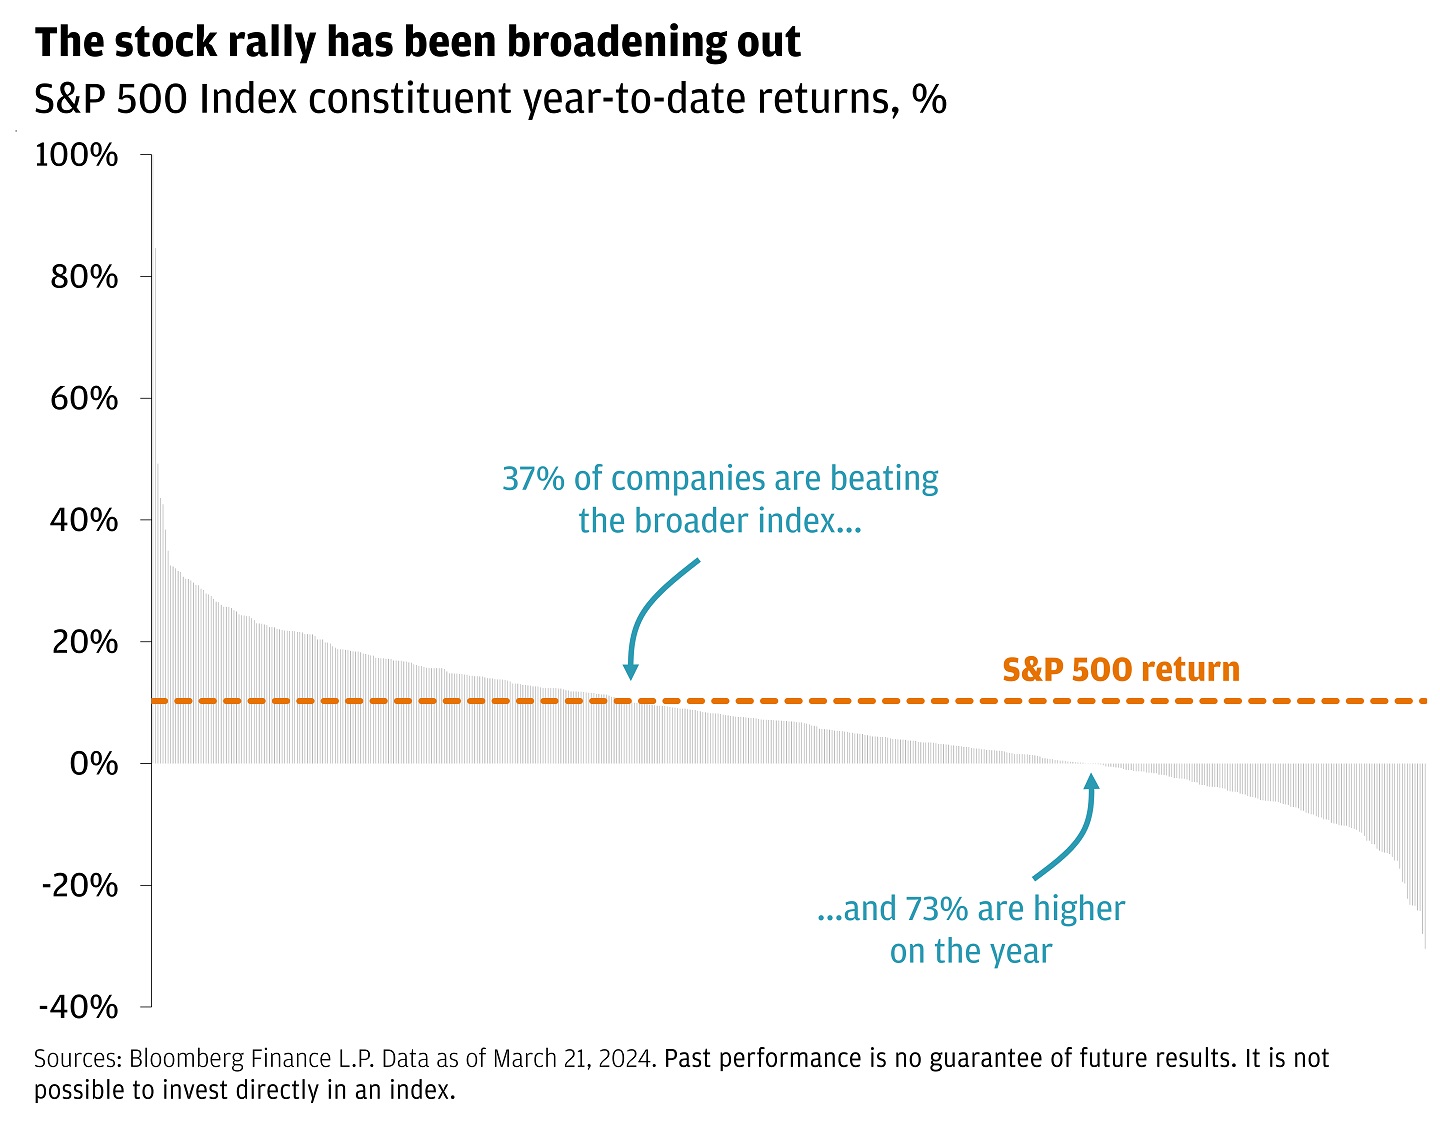 This chart shows the performance of S&P 500 constituents year-to-date in percent.